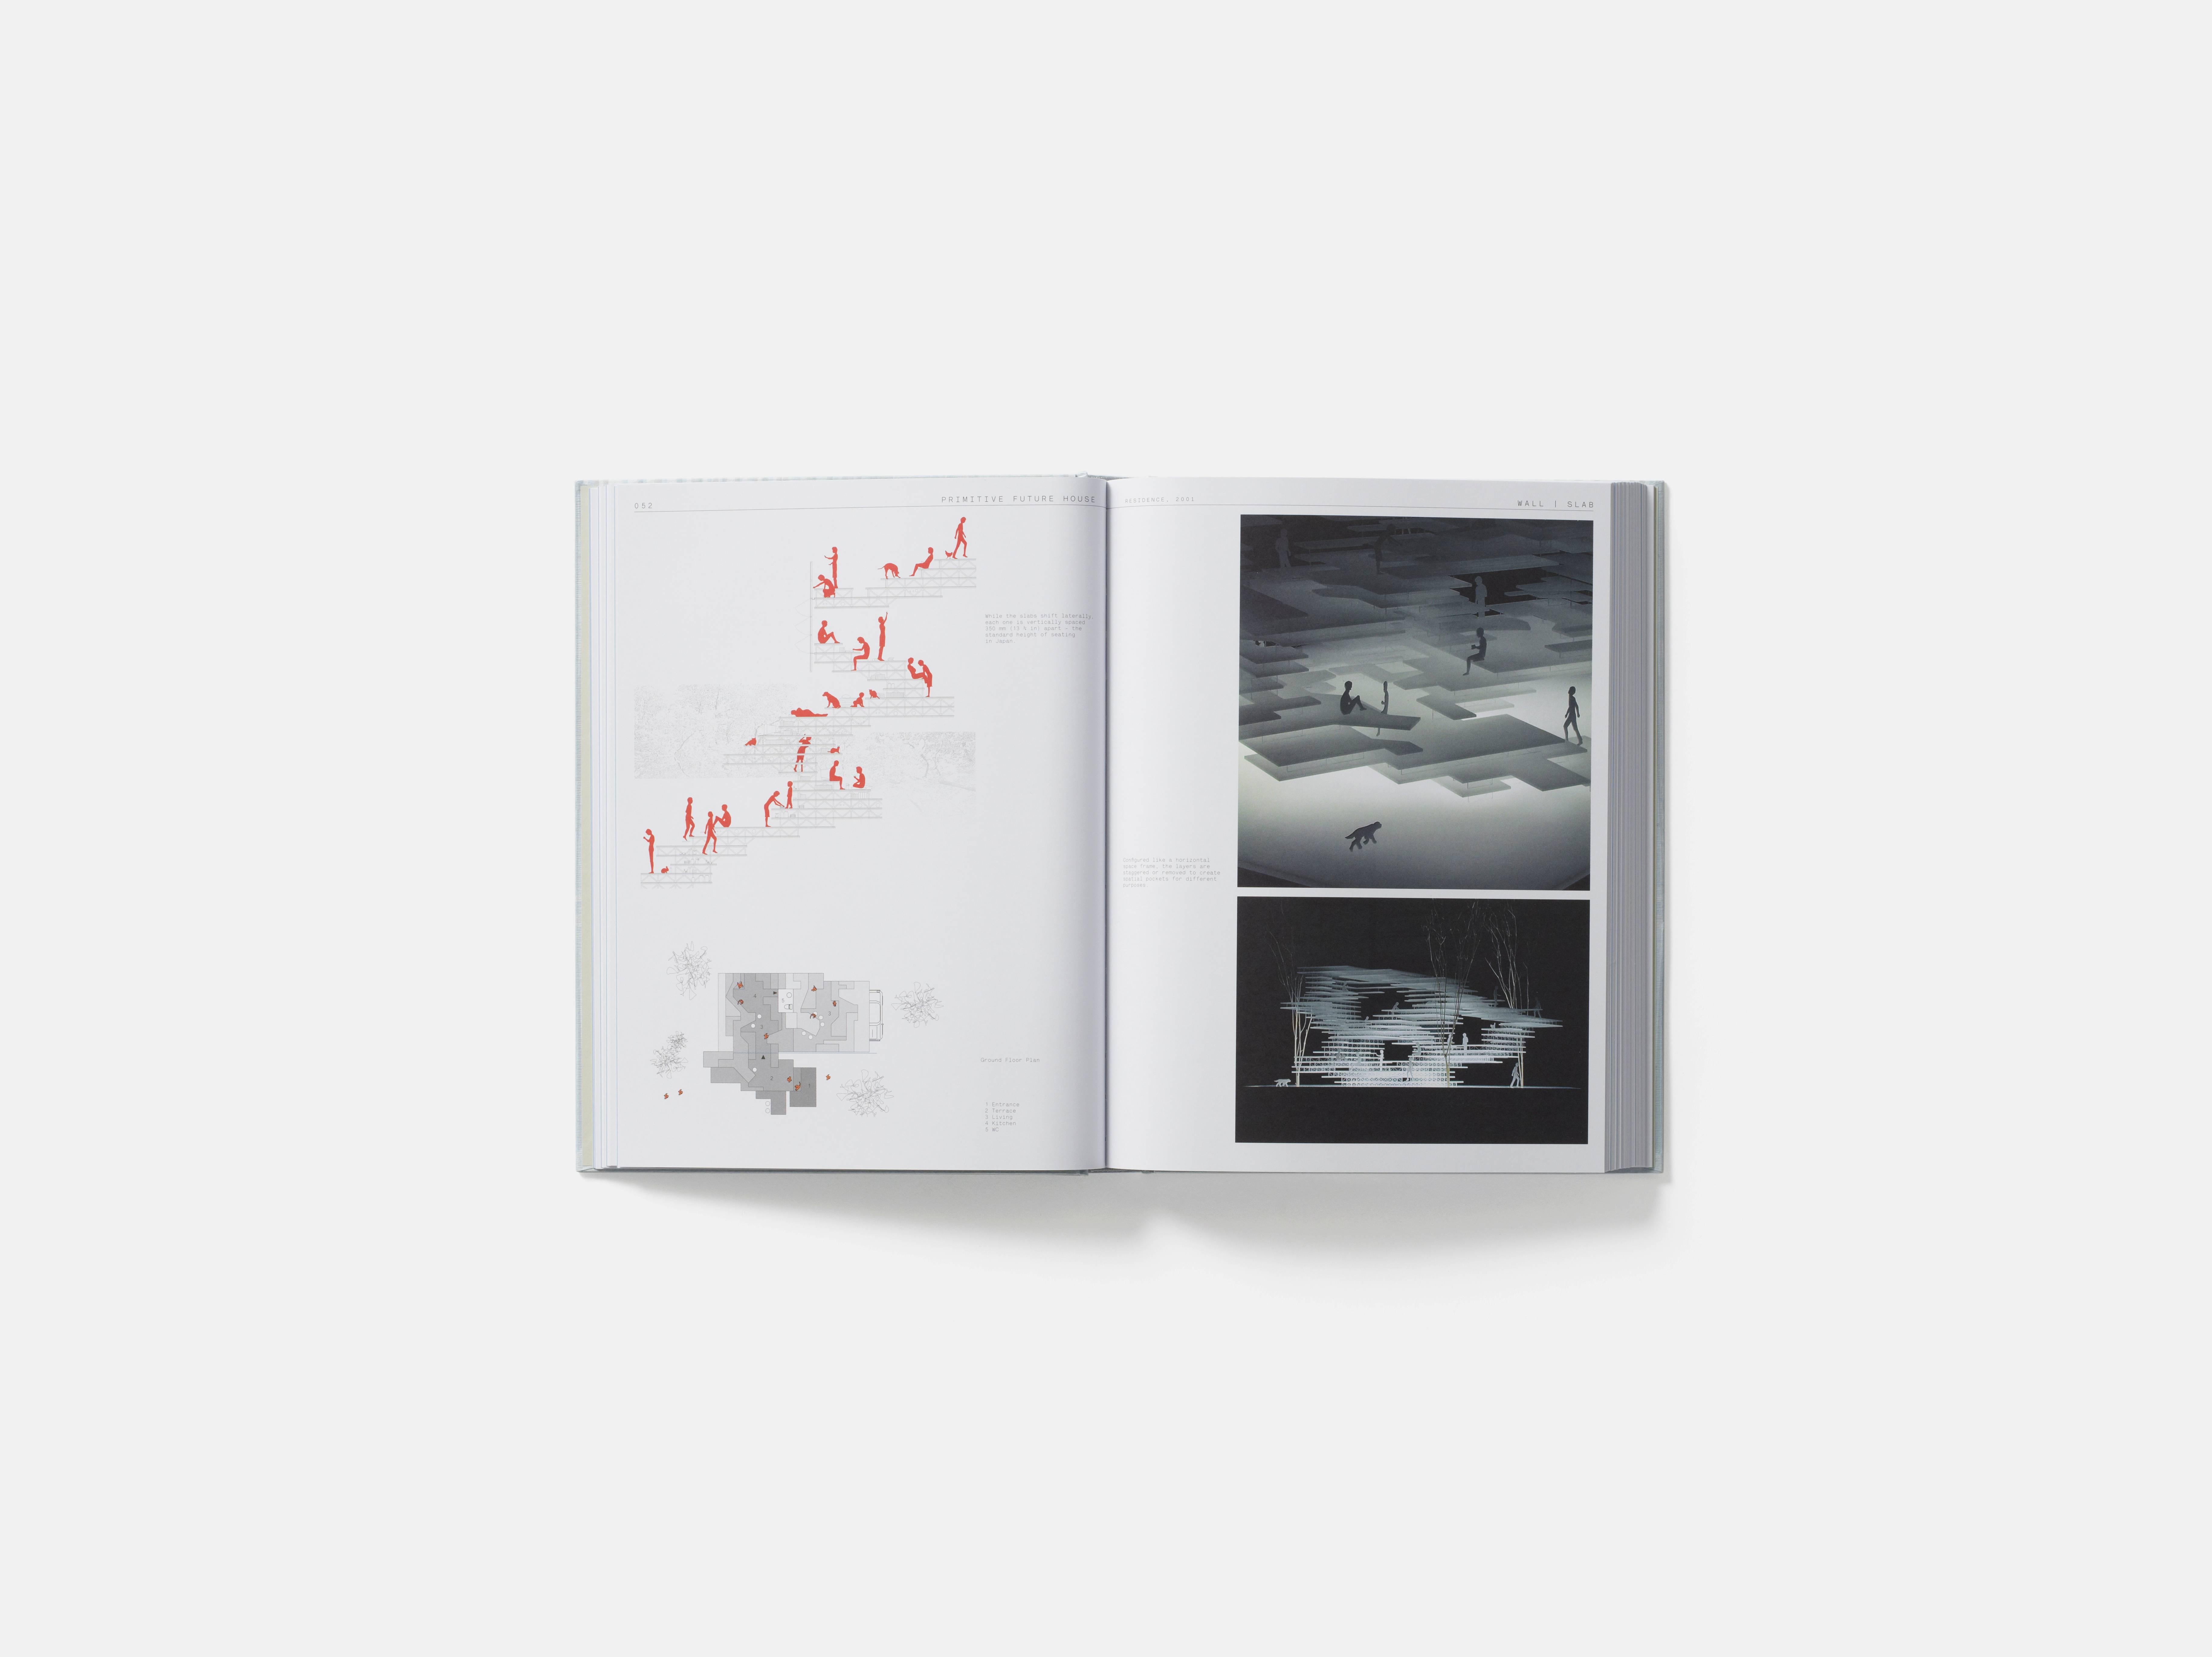 
The first comprehensive monograph on Japan's most creative, experimental and visionary architect, Sou Fujimoto.

Occasionally an architect emerges whose vision is so fresh that it causes us to reconsider the very nature of architecture. Sou